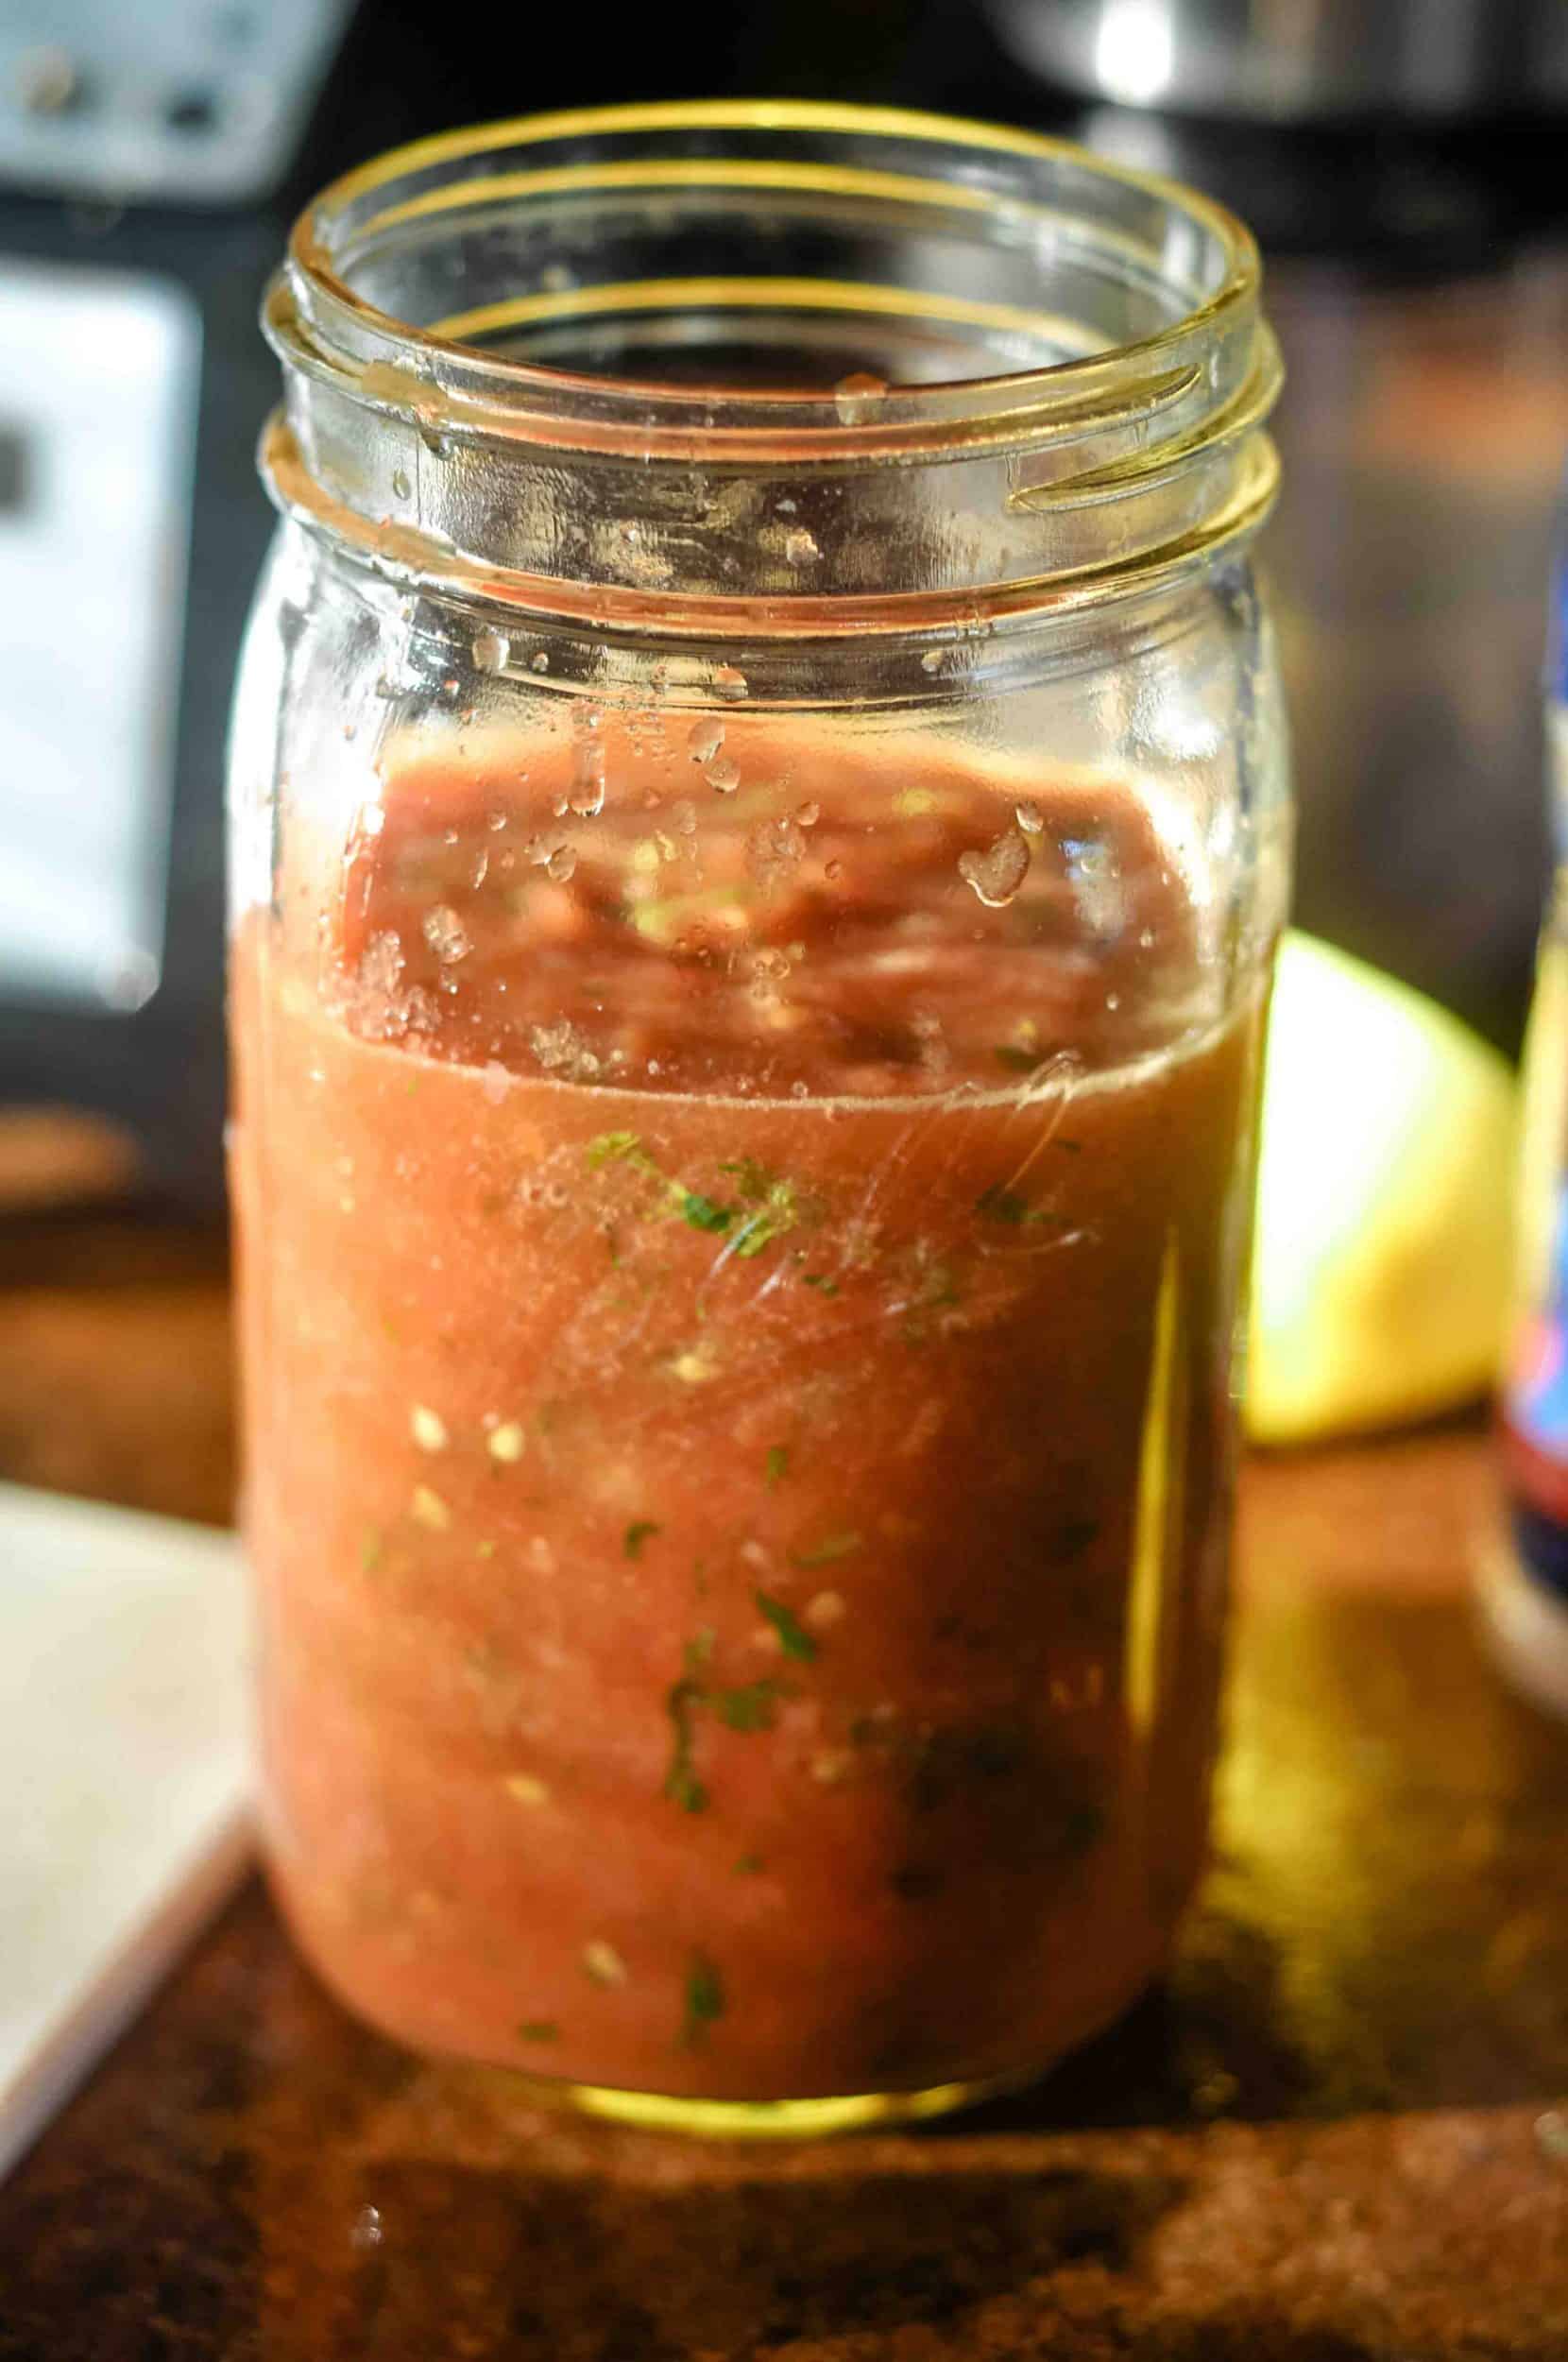 Jar of homemade salsa. A Traditional Diet advocates the use of homemade condiments and less processed foods.